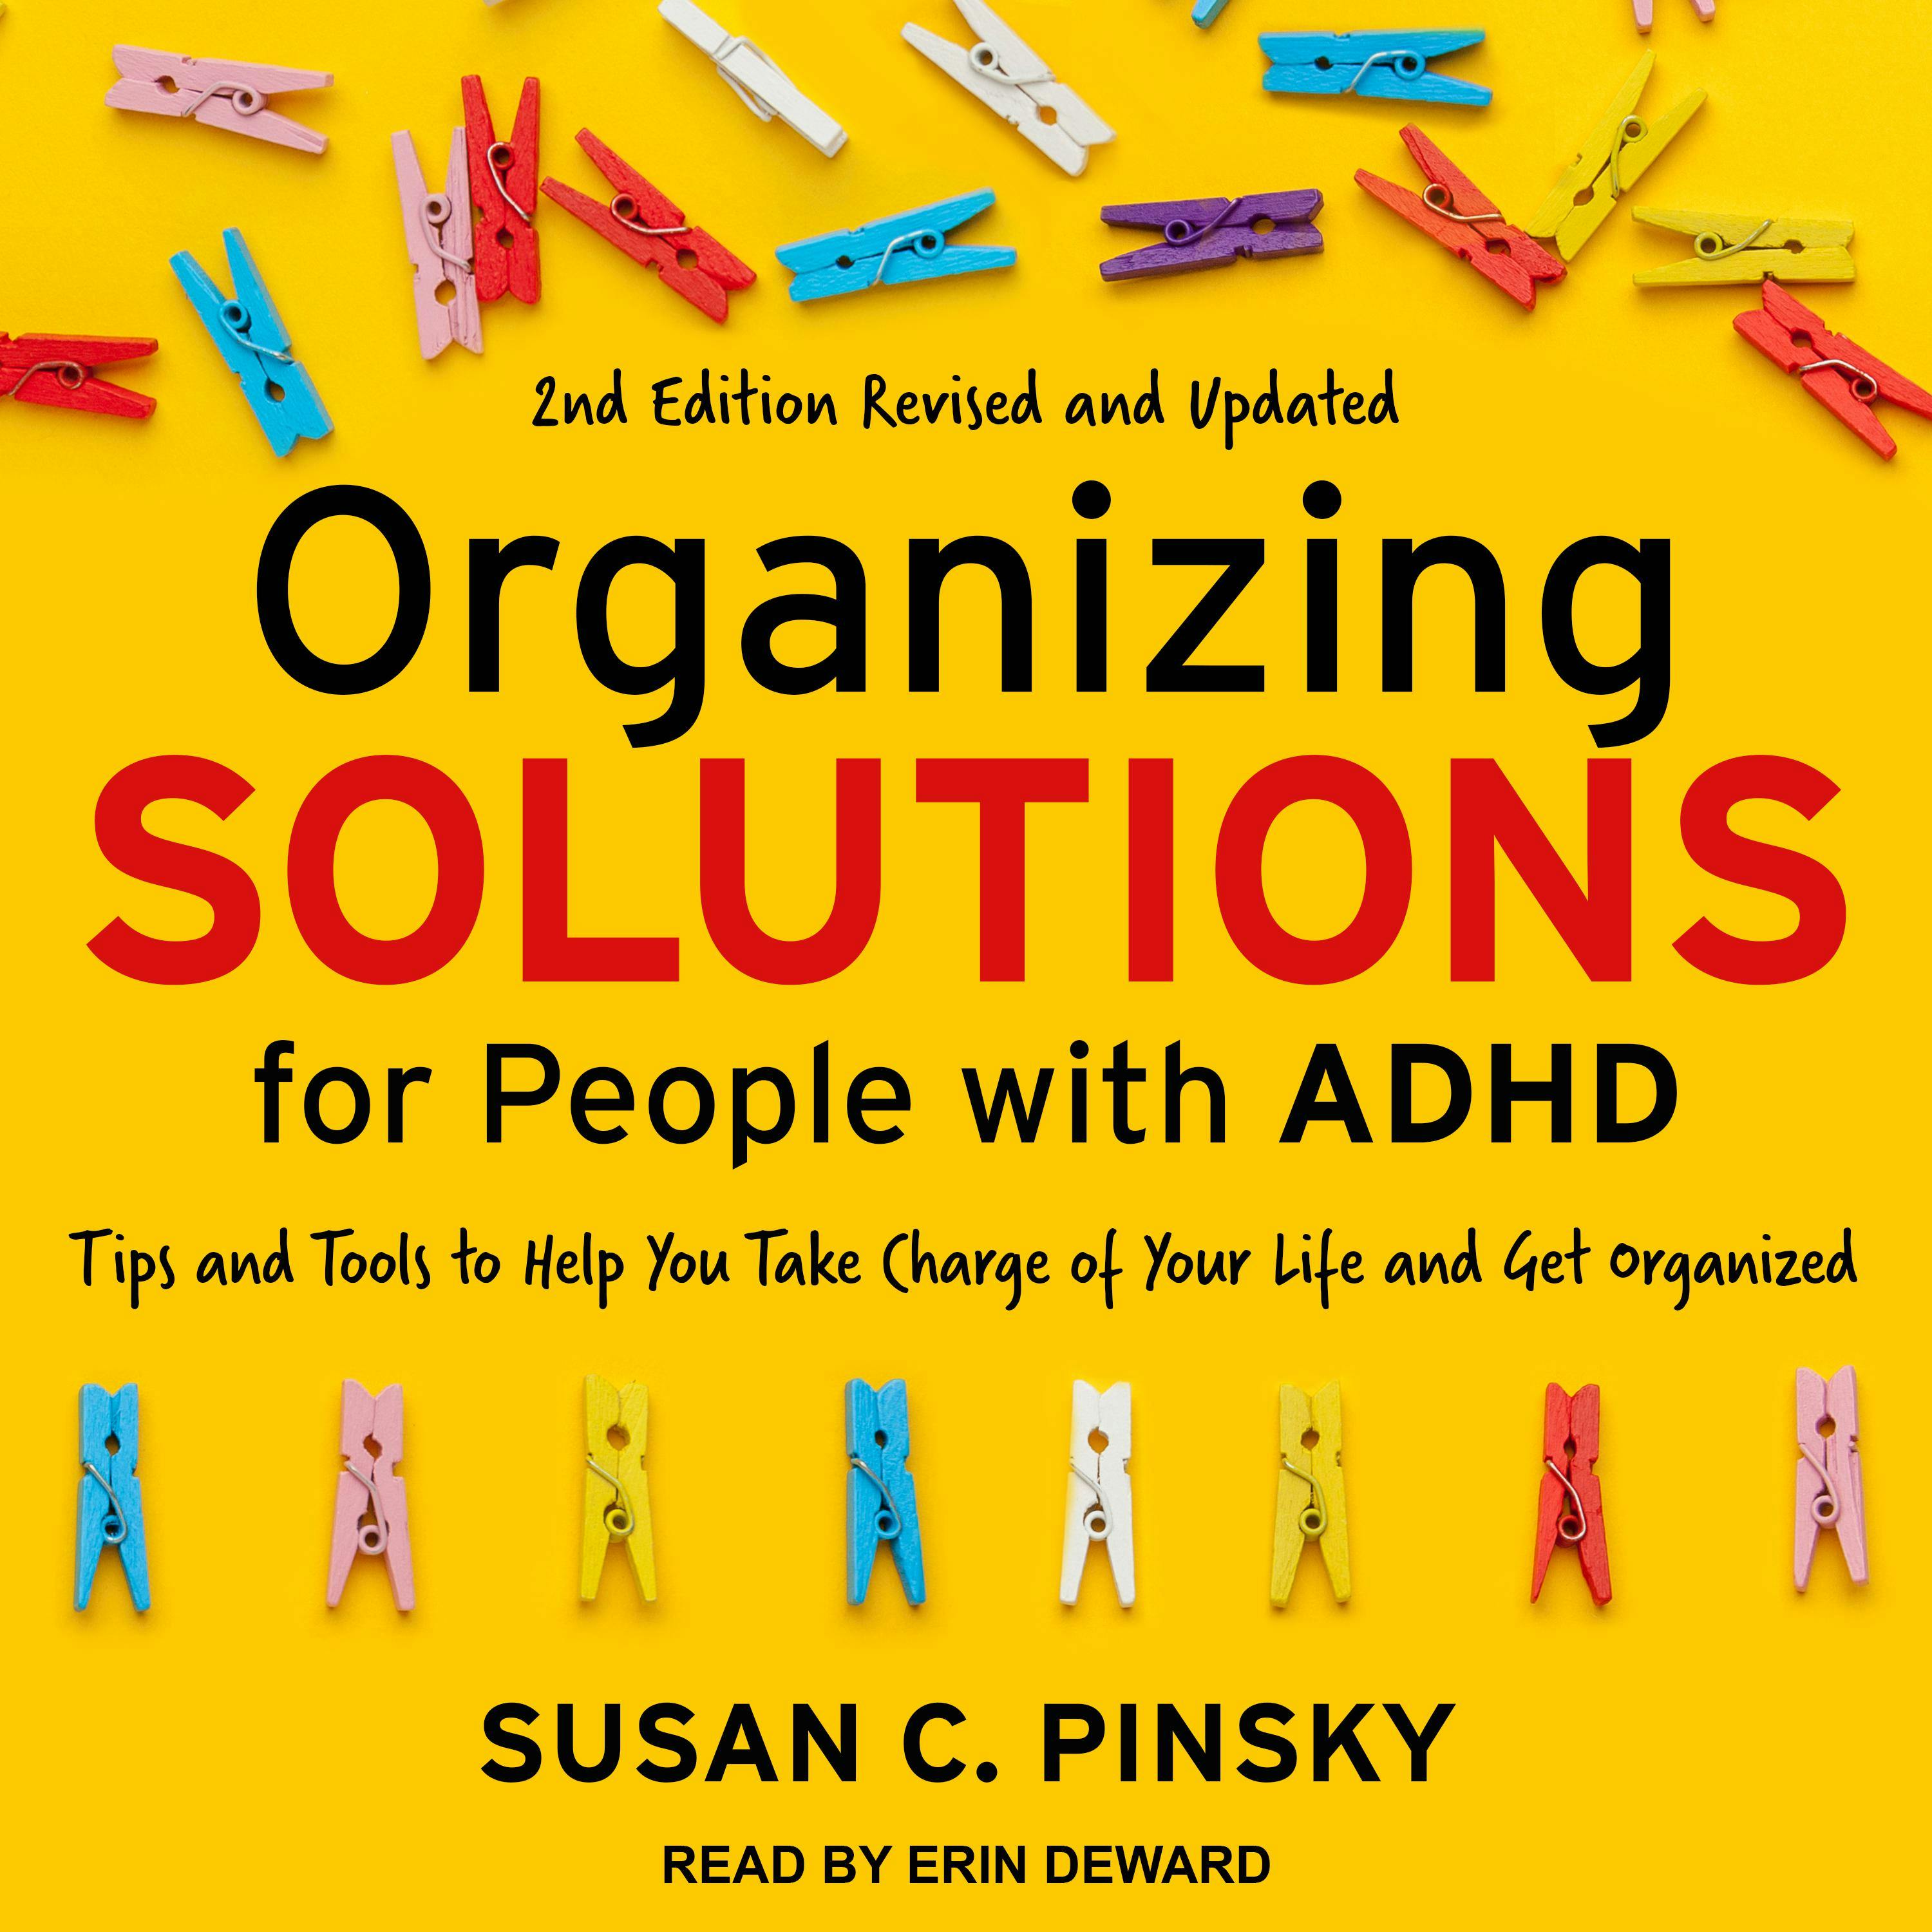 Organizing Solutions for People with ADHD, 2nd Edition-Revised and Updated: Tips and Tools to Help You Take Charge of Your Life and Get Organized - undefined